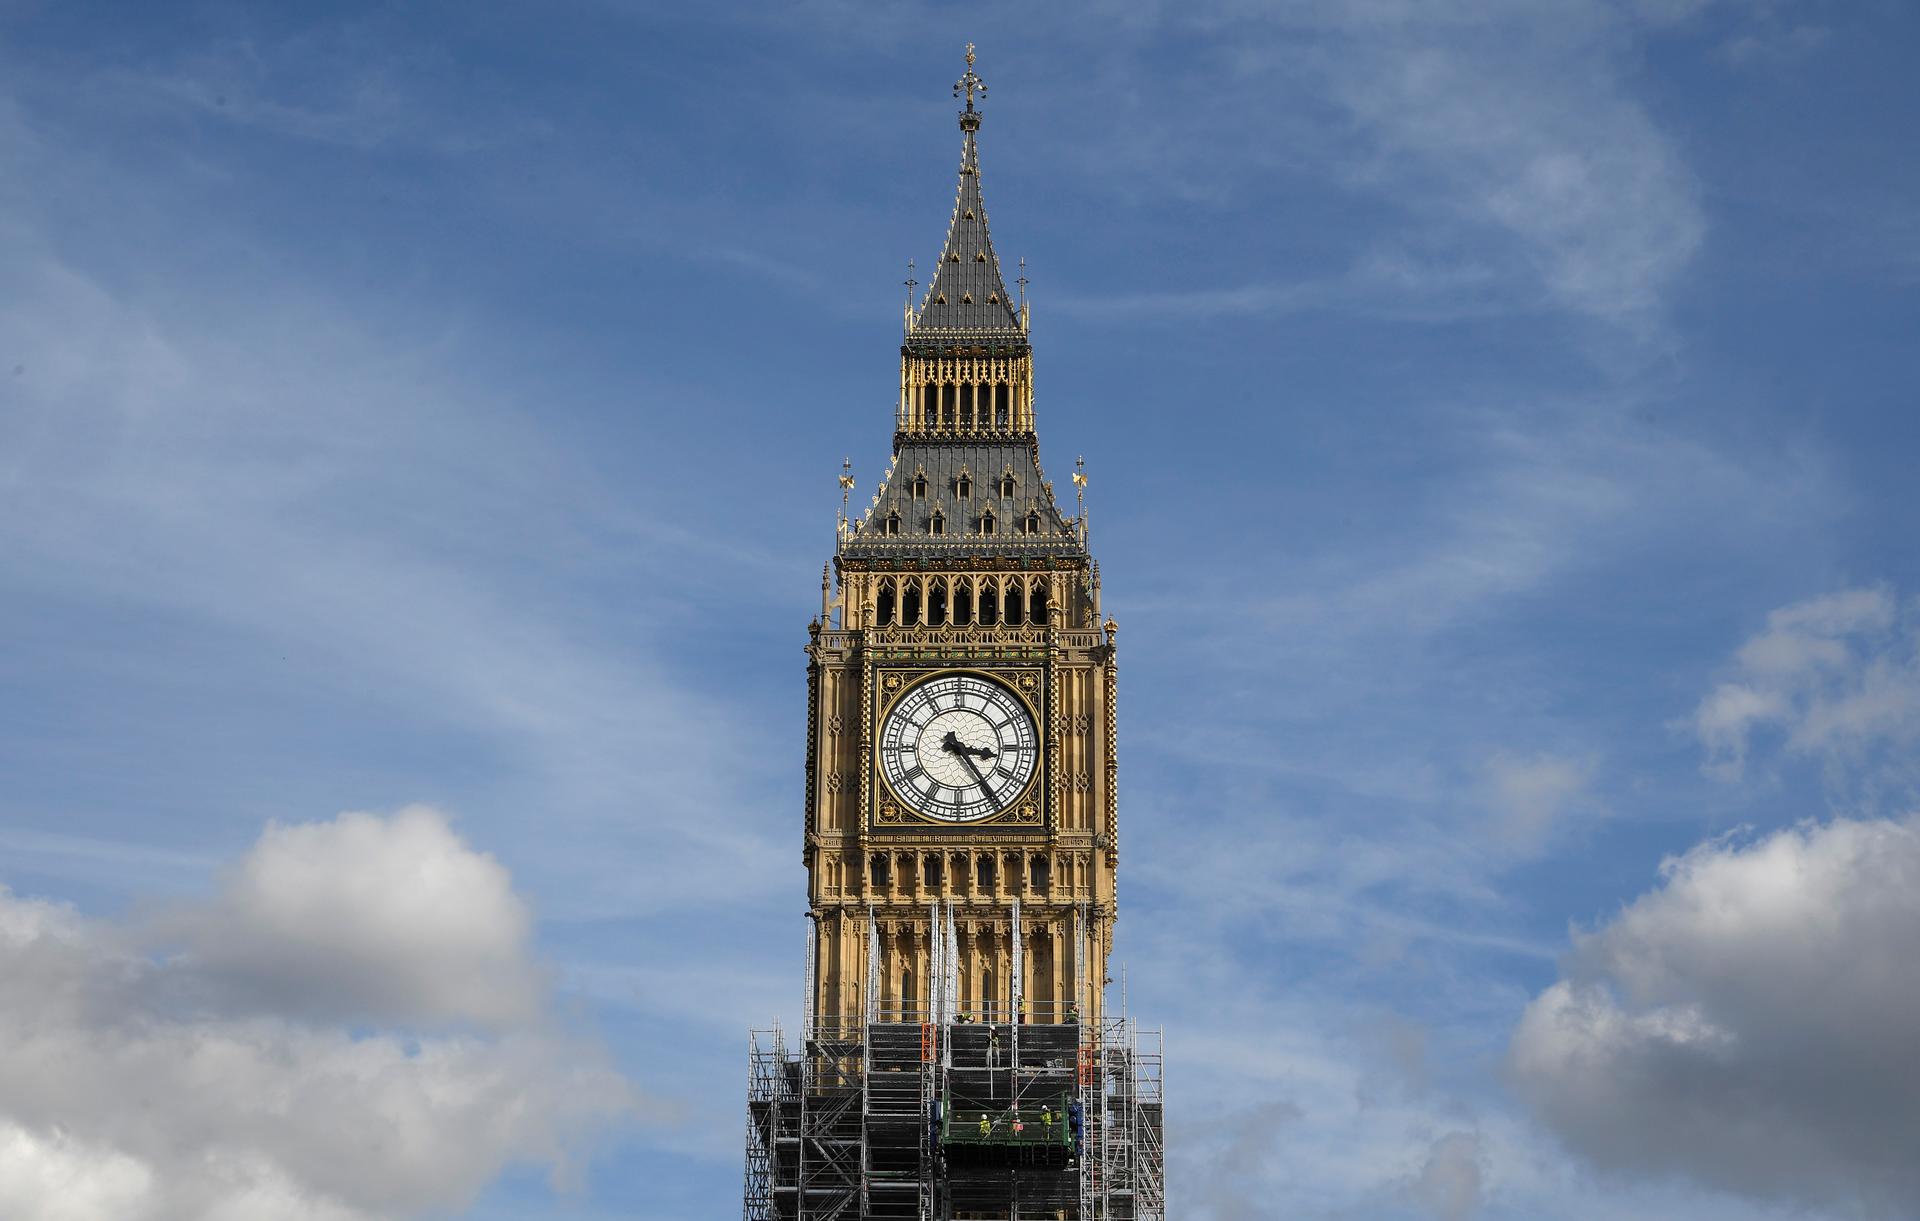 Scaffolders work on the Big Ben clock tower which is undergoing maintenance in Westminster, London, Sept. 28, 2017